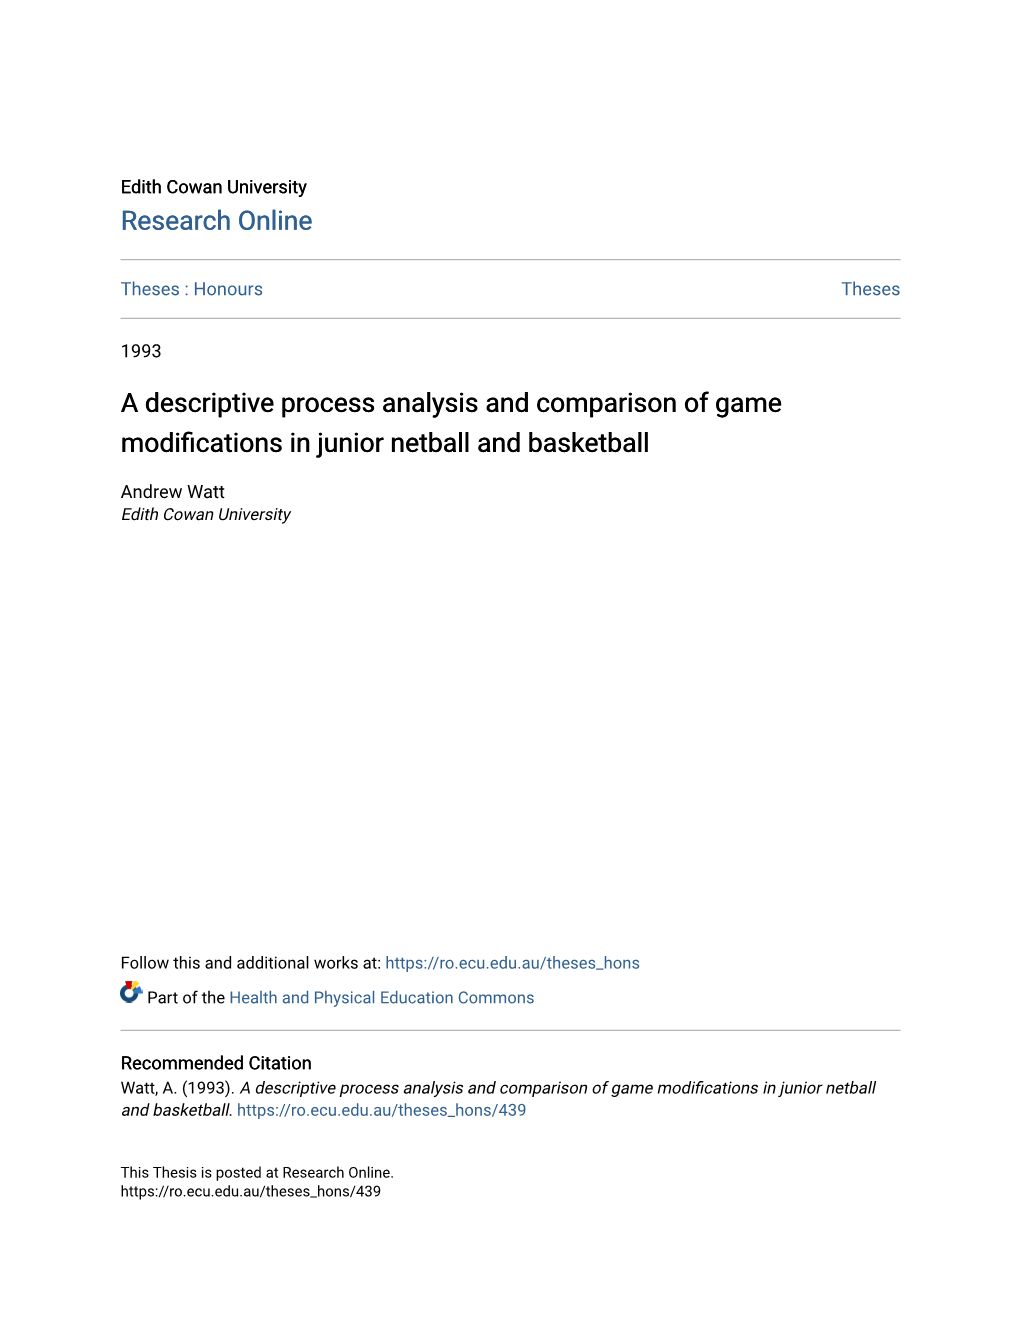 A Descriptive Process Analysis and Comparison of Game Modifications in Junior Netball and Basketball